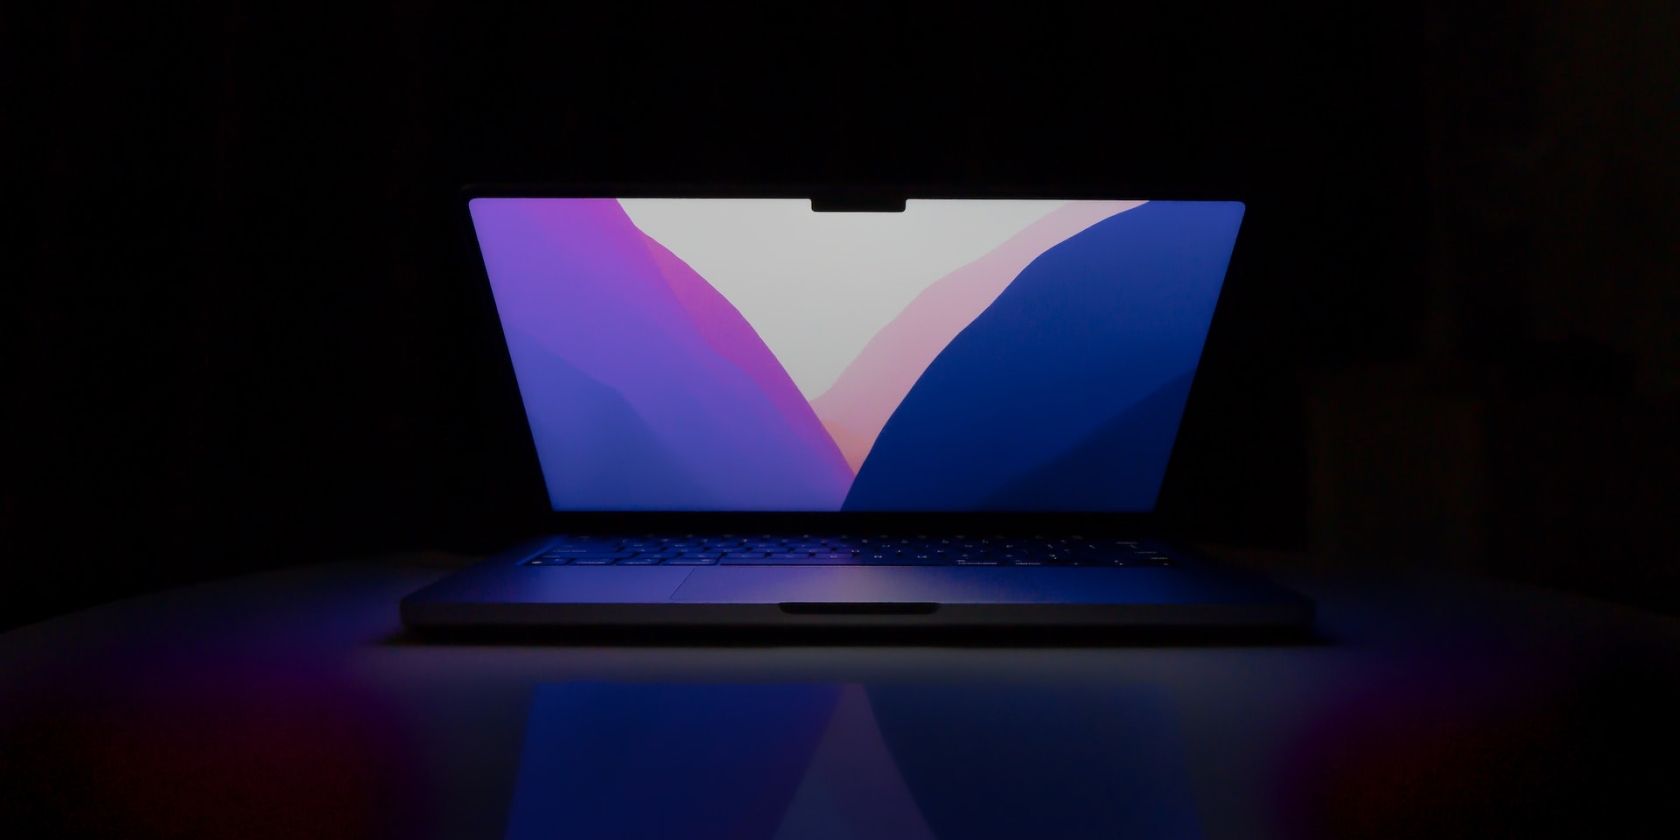 14-inch MacBook Pro on a table in the dark